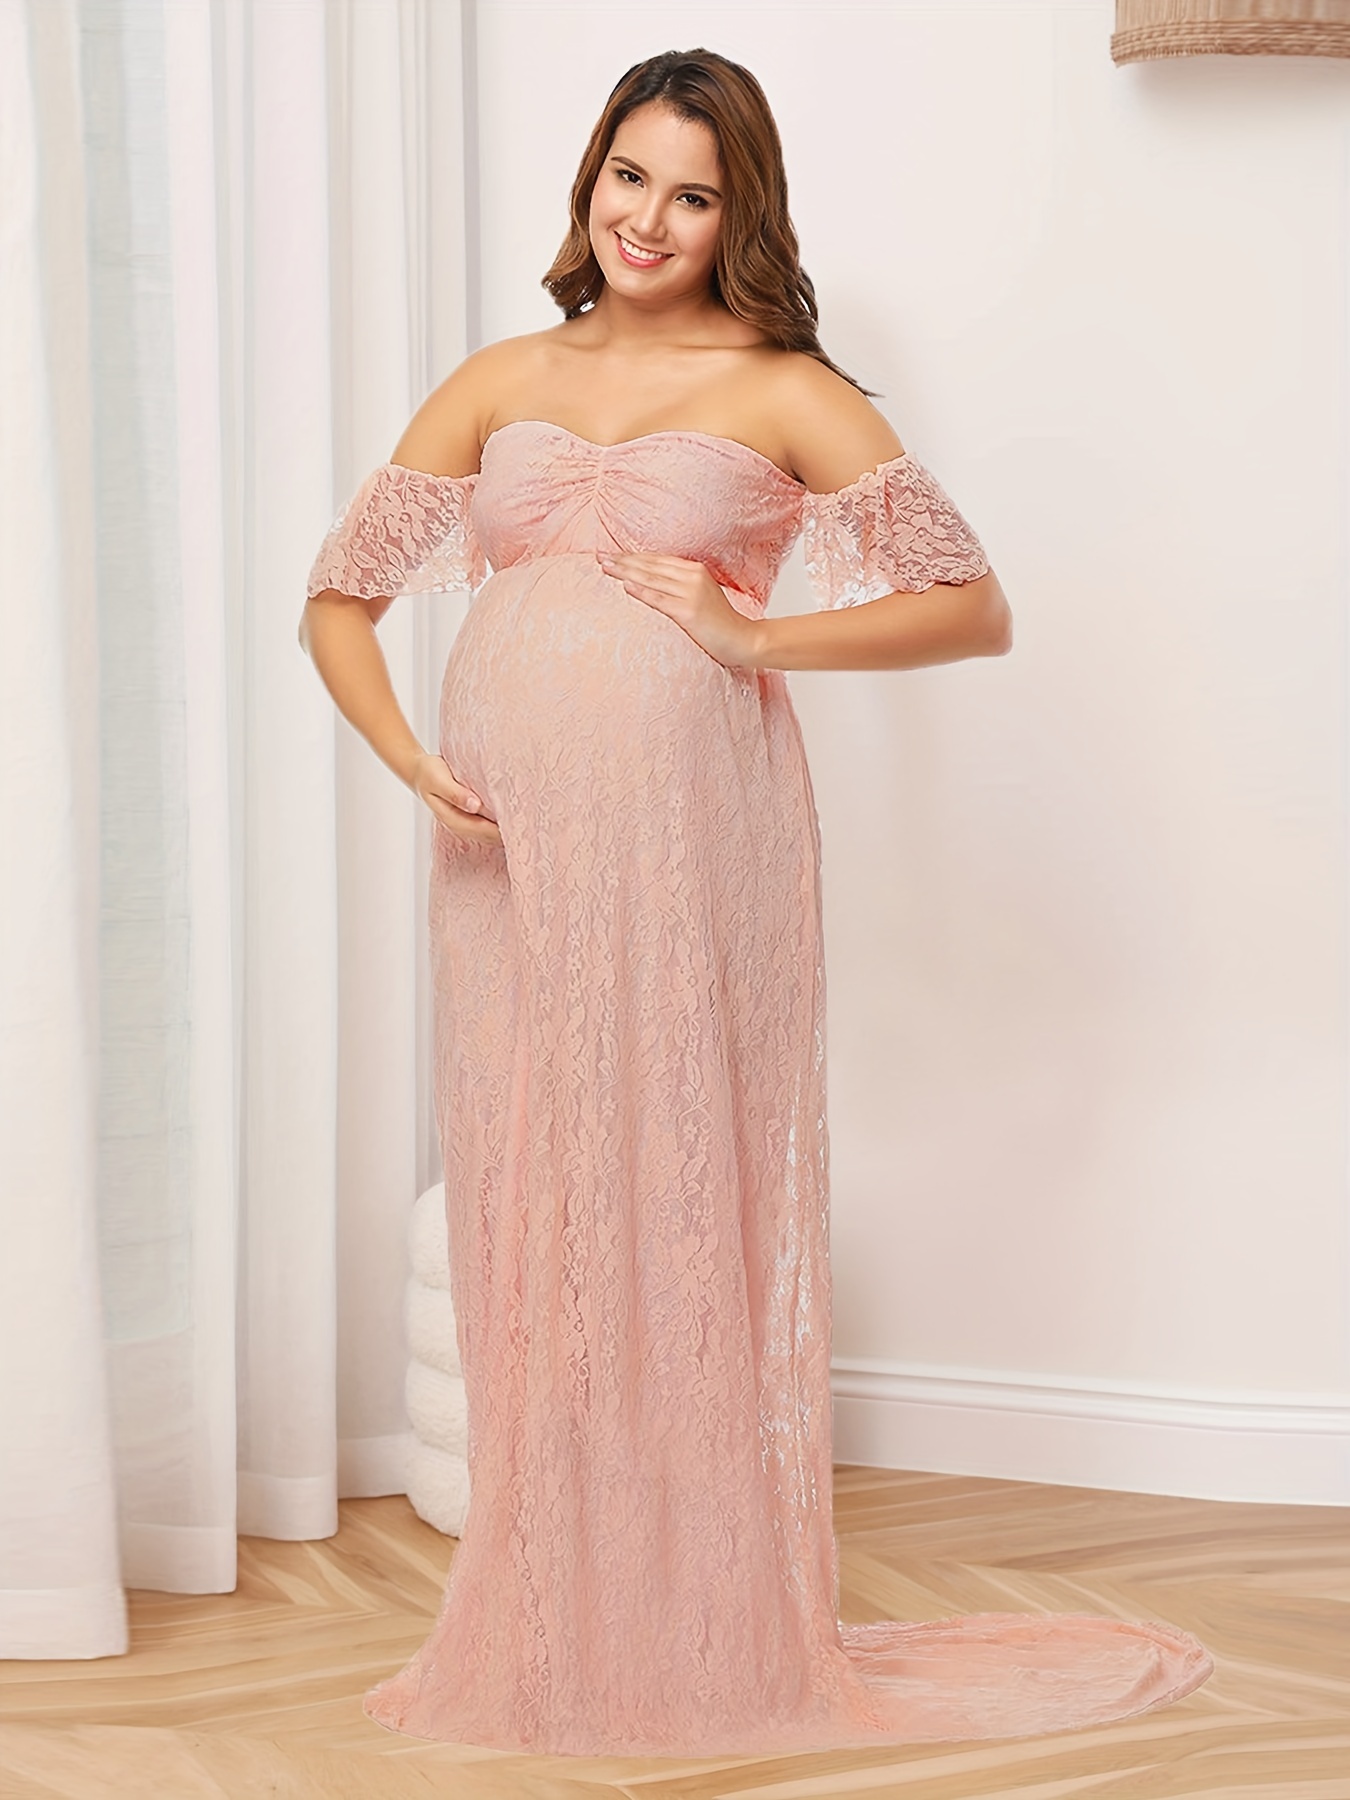 womens maternity solid off shoulder maxi dress for party wedding formal prom pregnant womens clothing coquette style